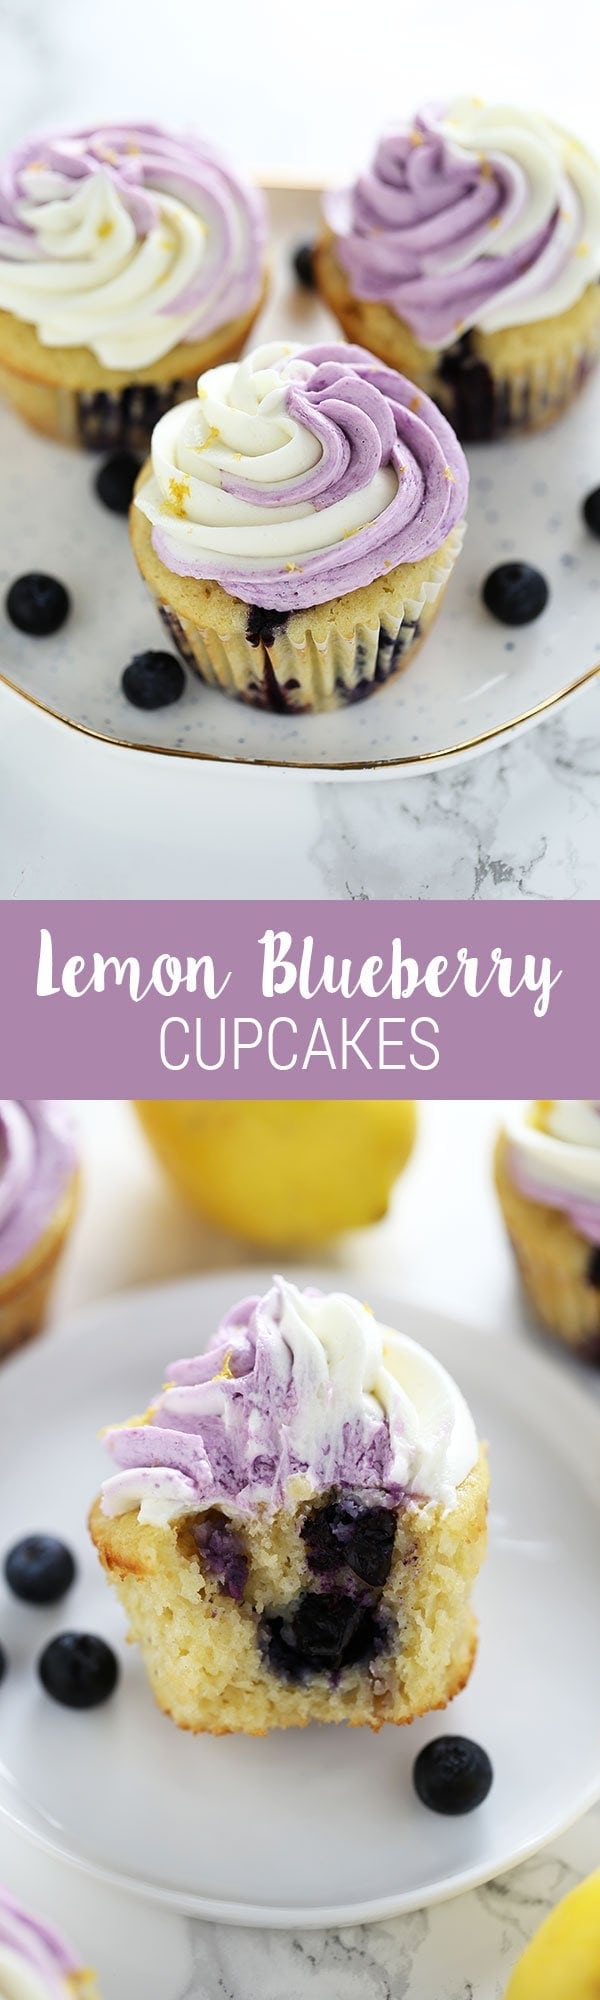 Lemon Blueberry Cupcakes are perfectly tender and moist with tons of fresh lemon and blueberry flavors, plus an easy swirled buttercream for a gourmet look that will impress everyone!